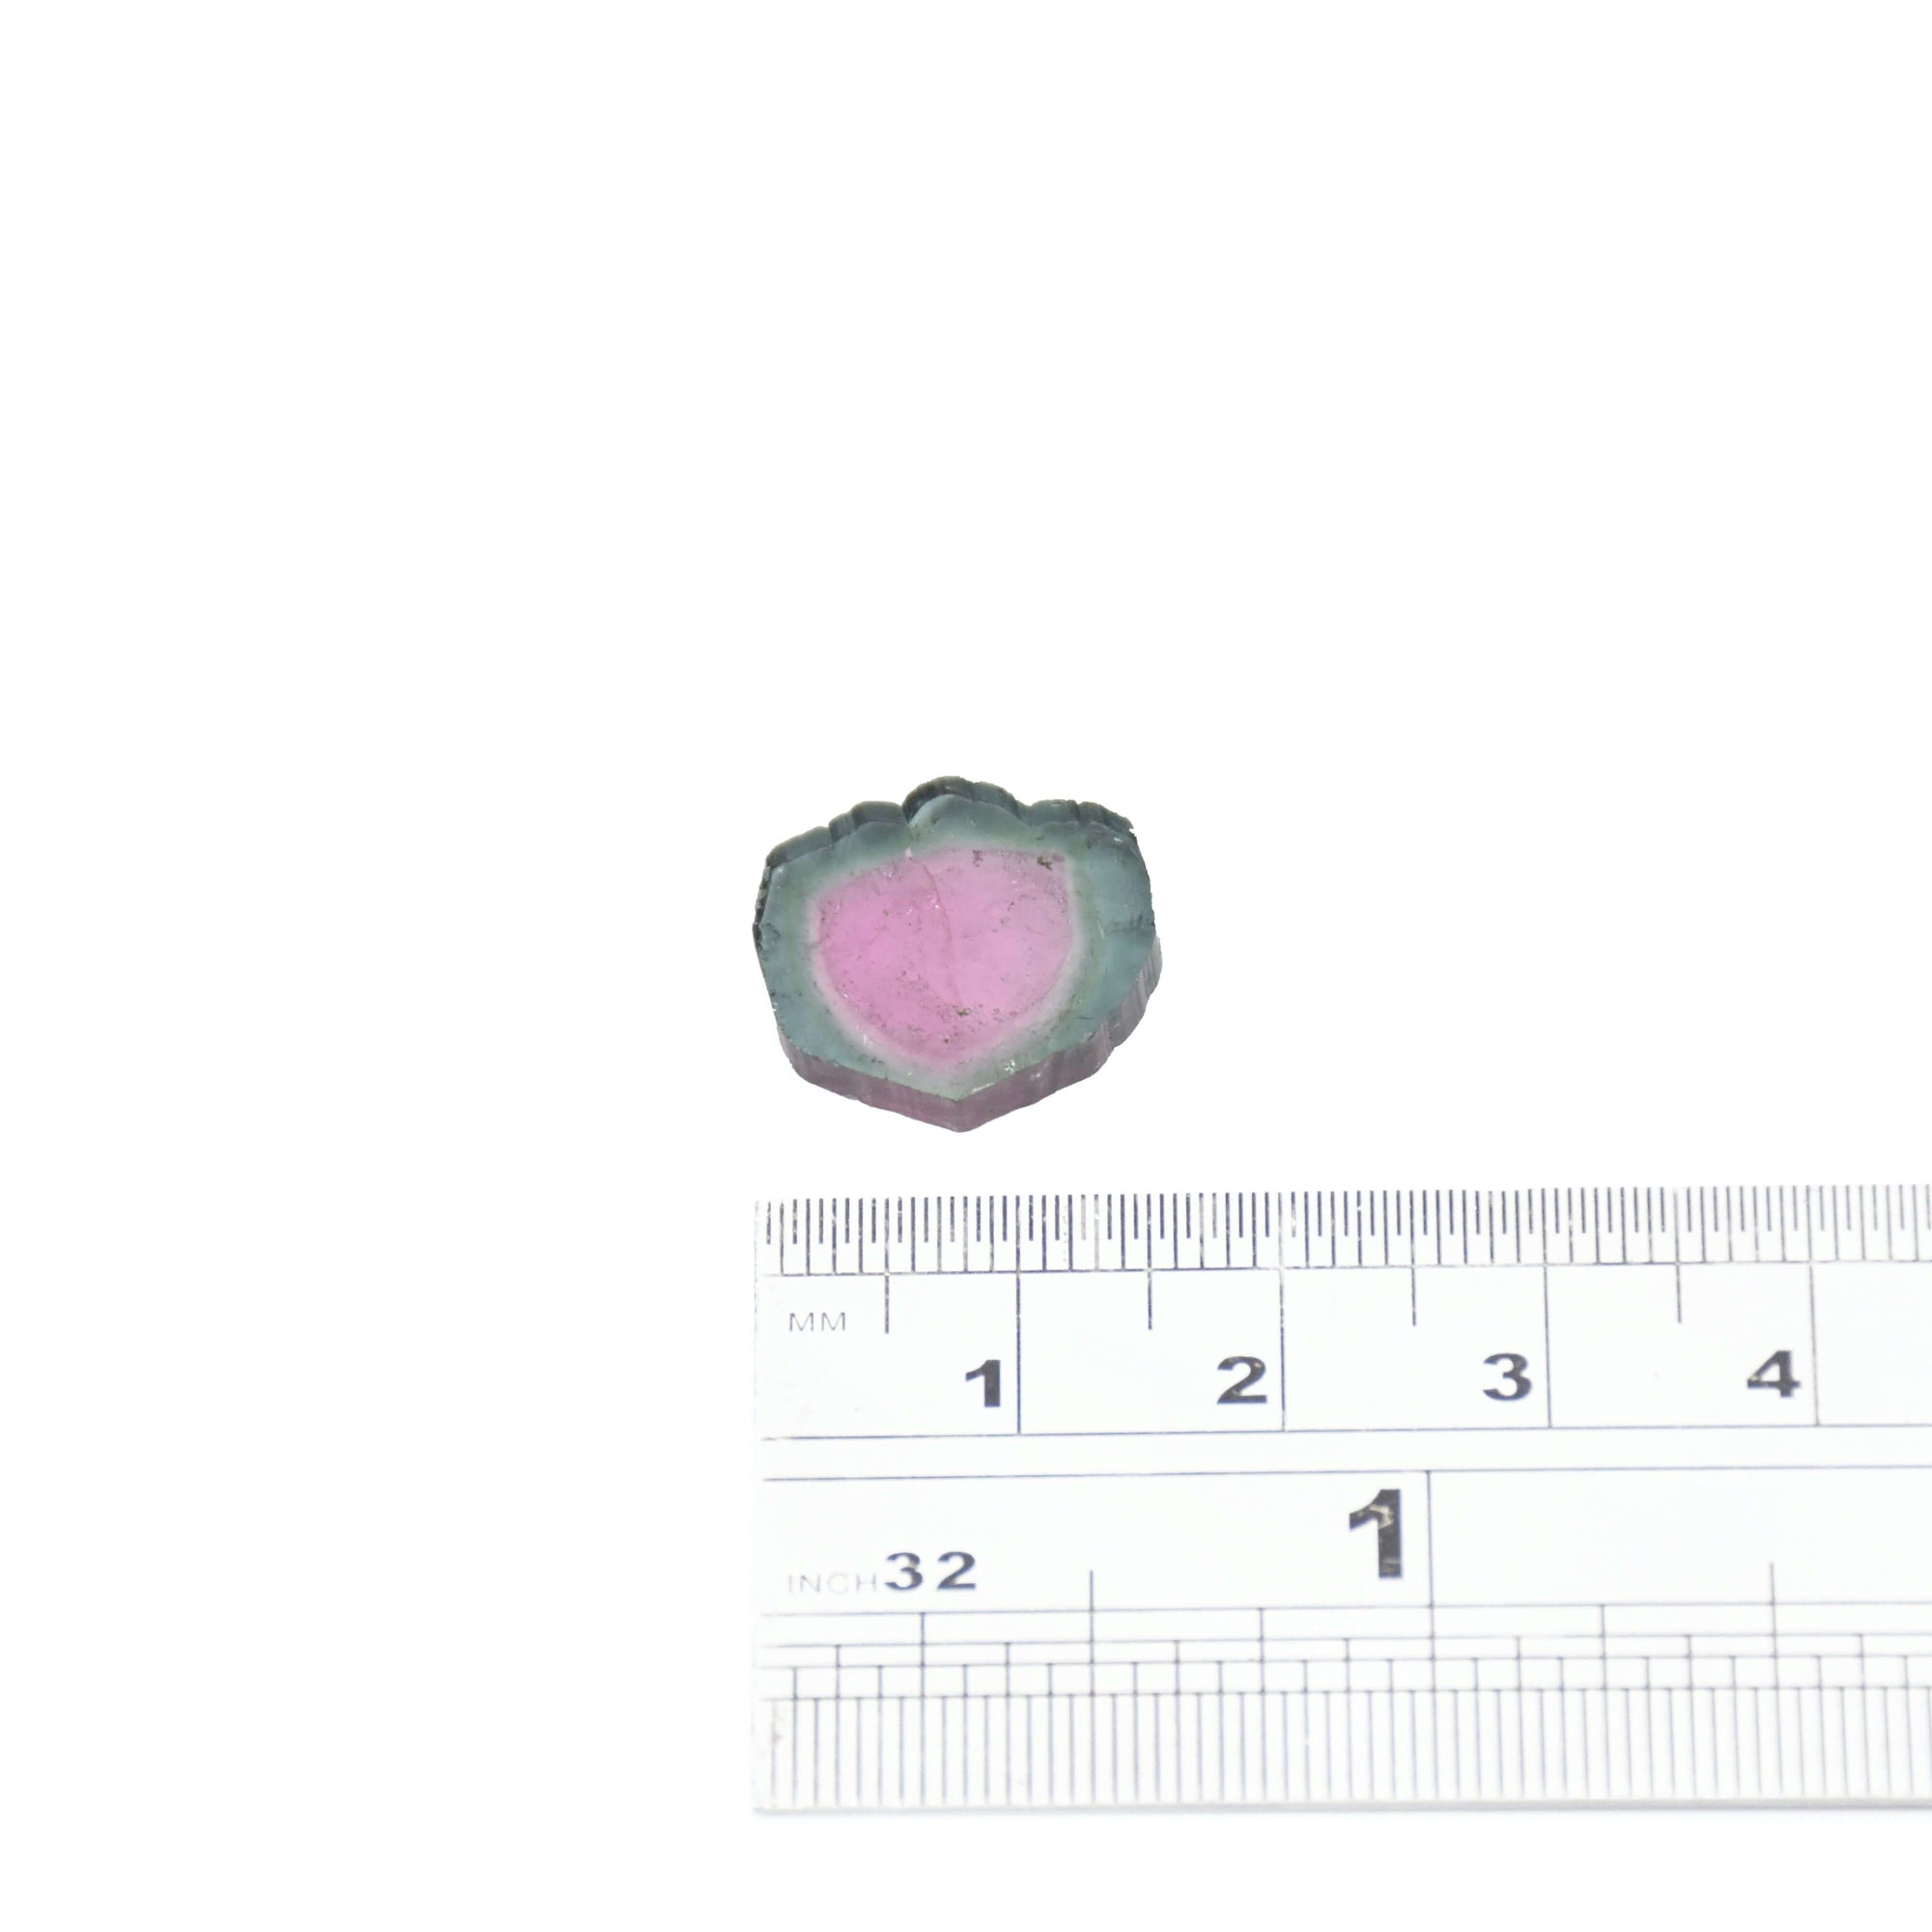 A teal and pale pink genuine watermelon tourmaline stone